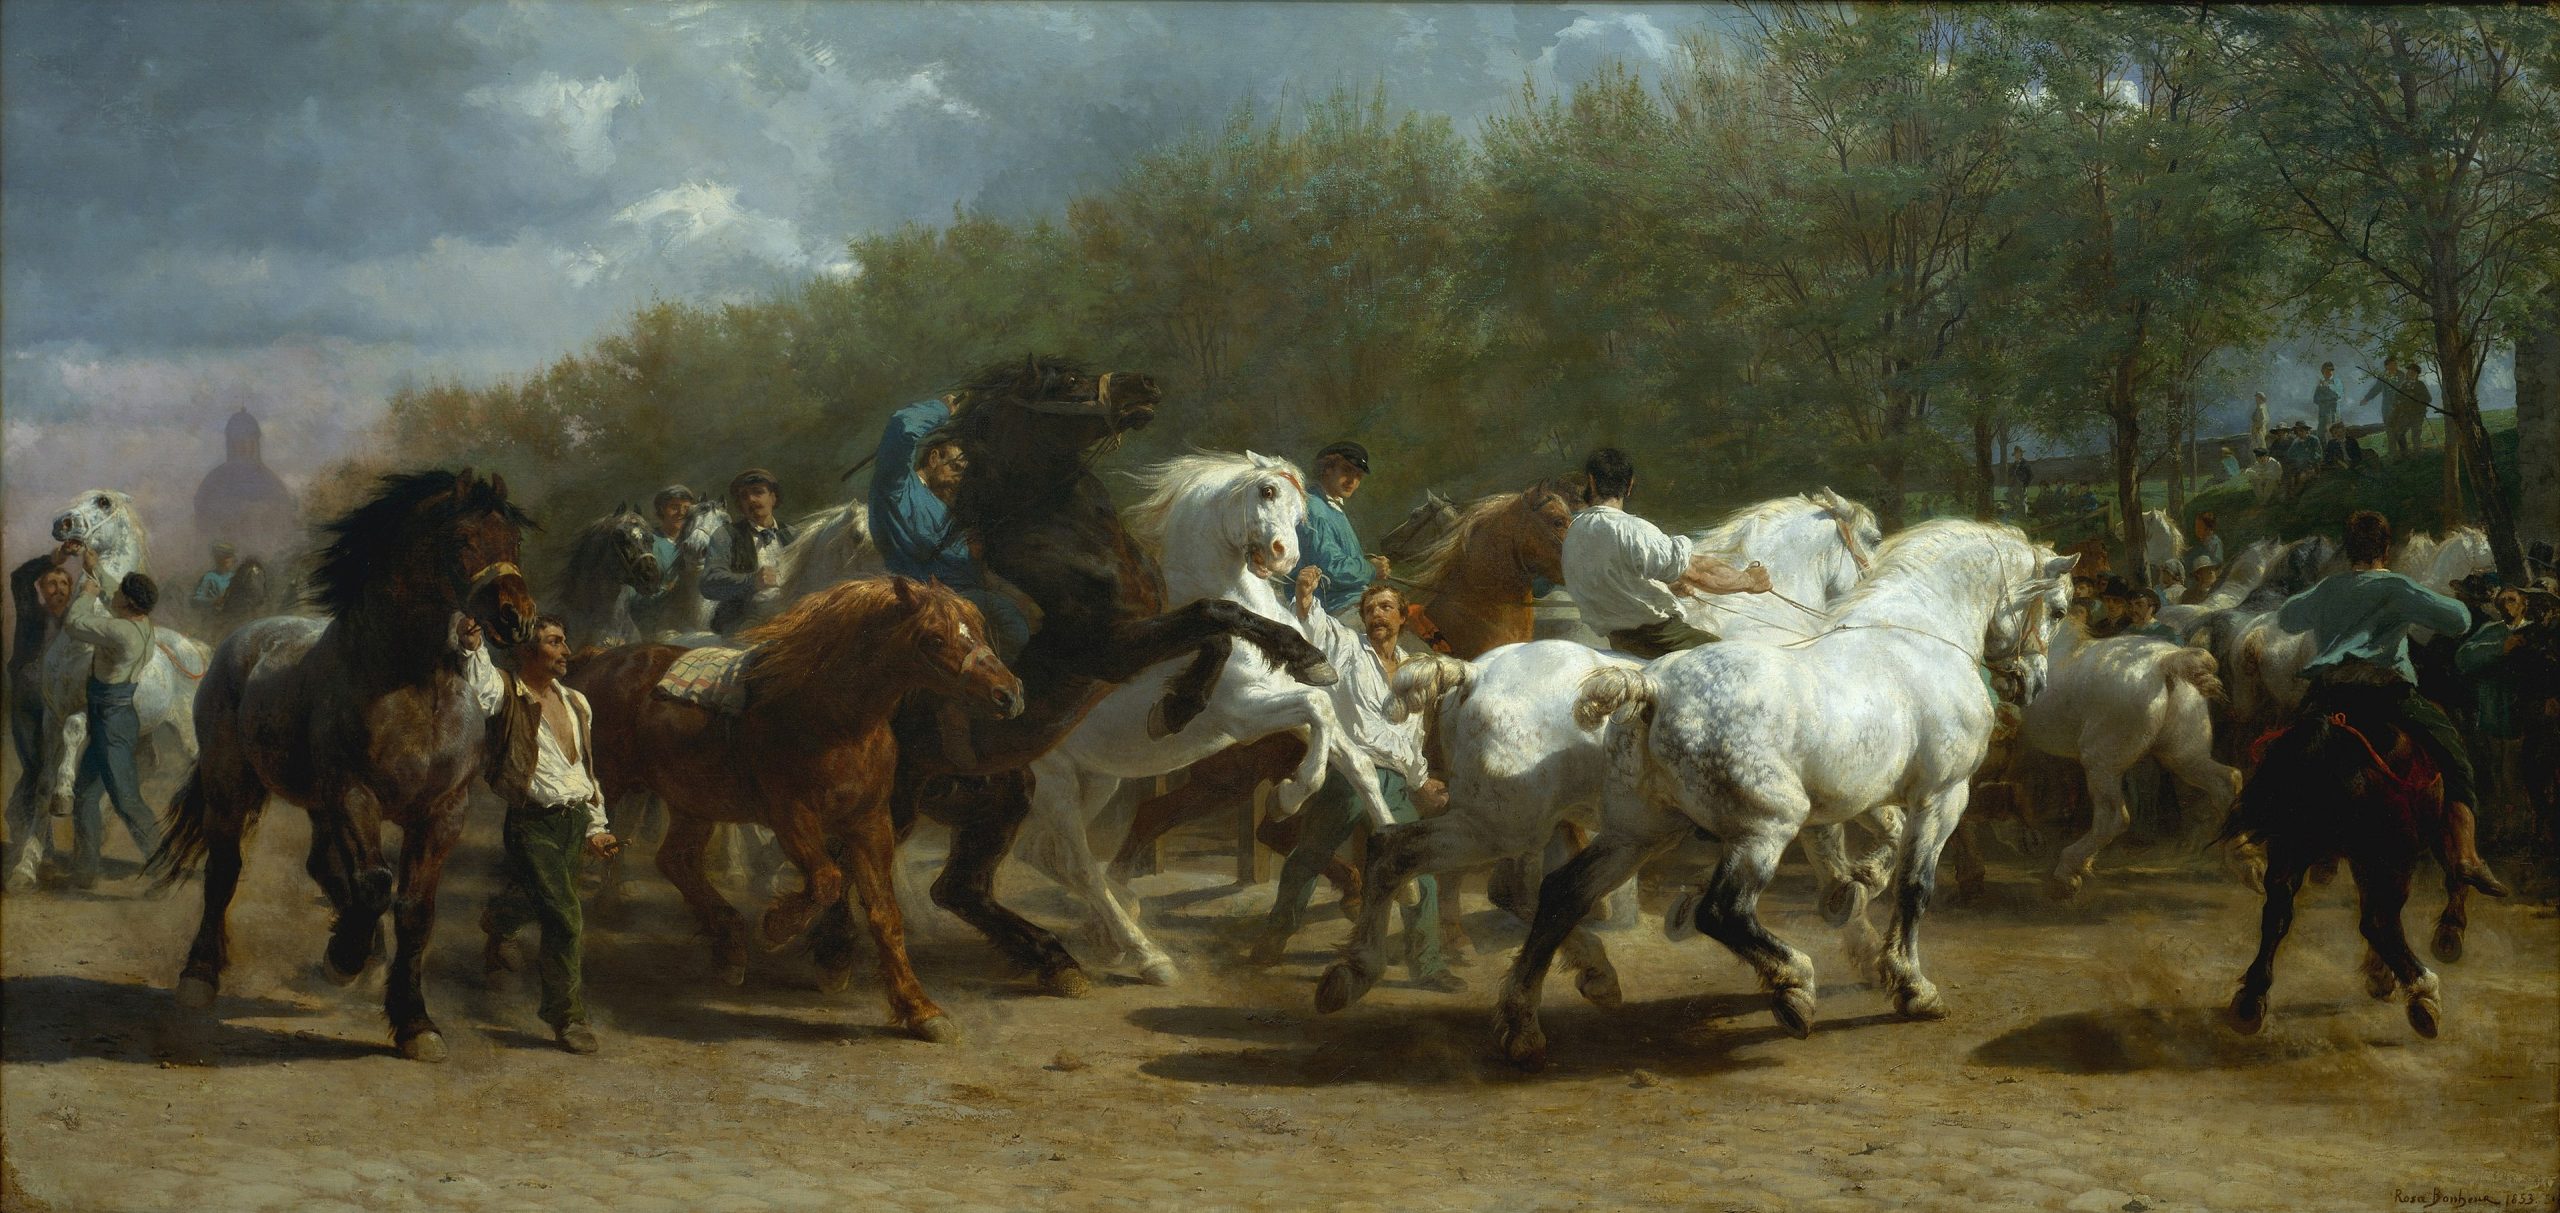 A procession of people riding various horses across a dry meadow